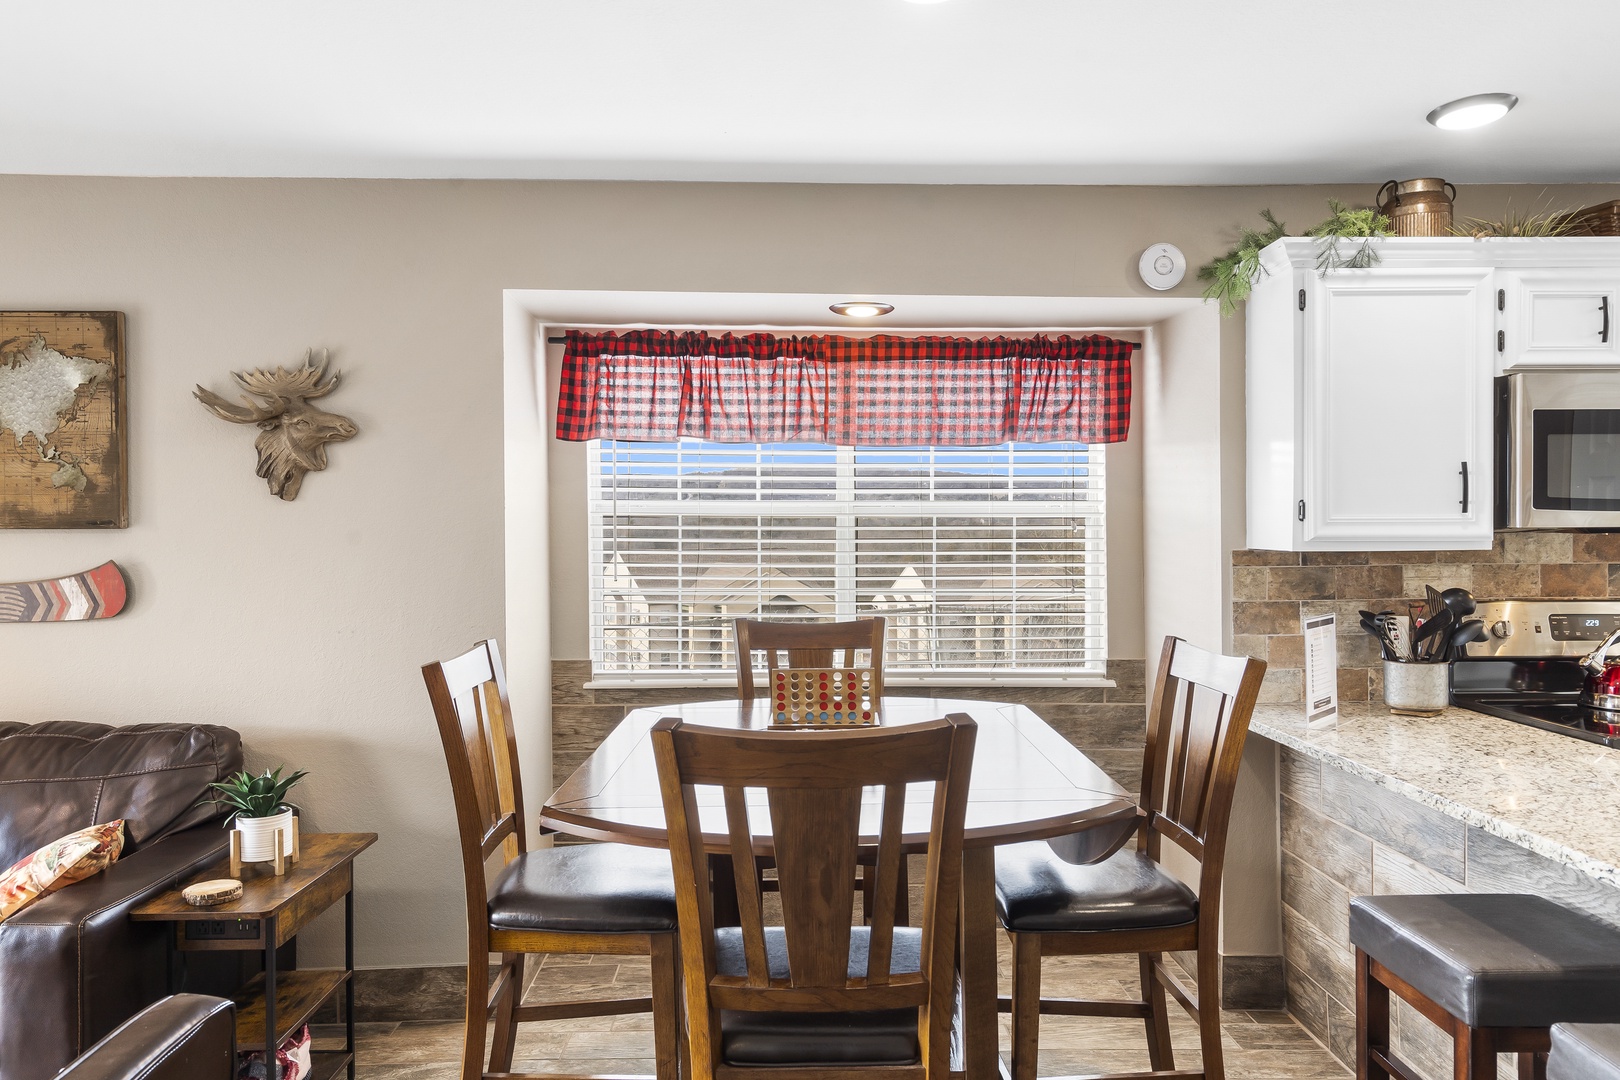 Gather for meals at the dining table, with seating for 4